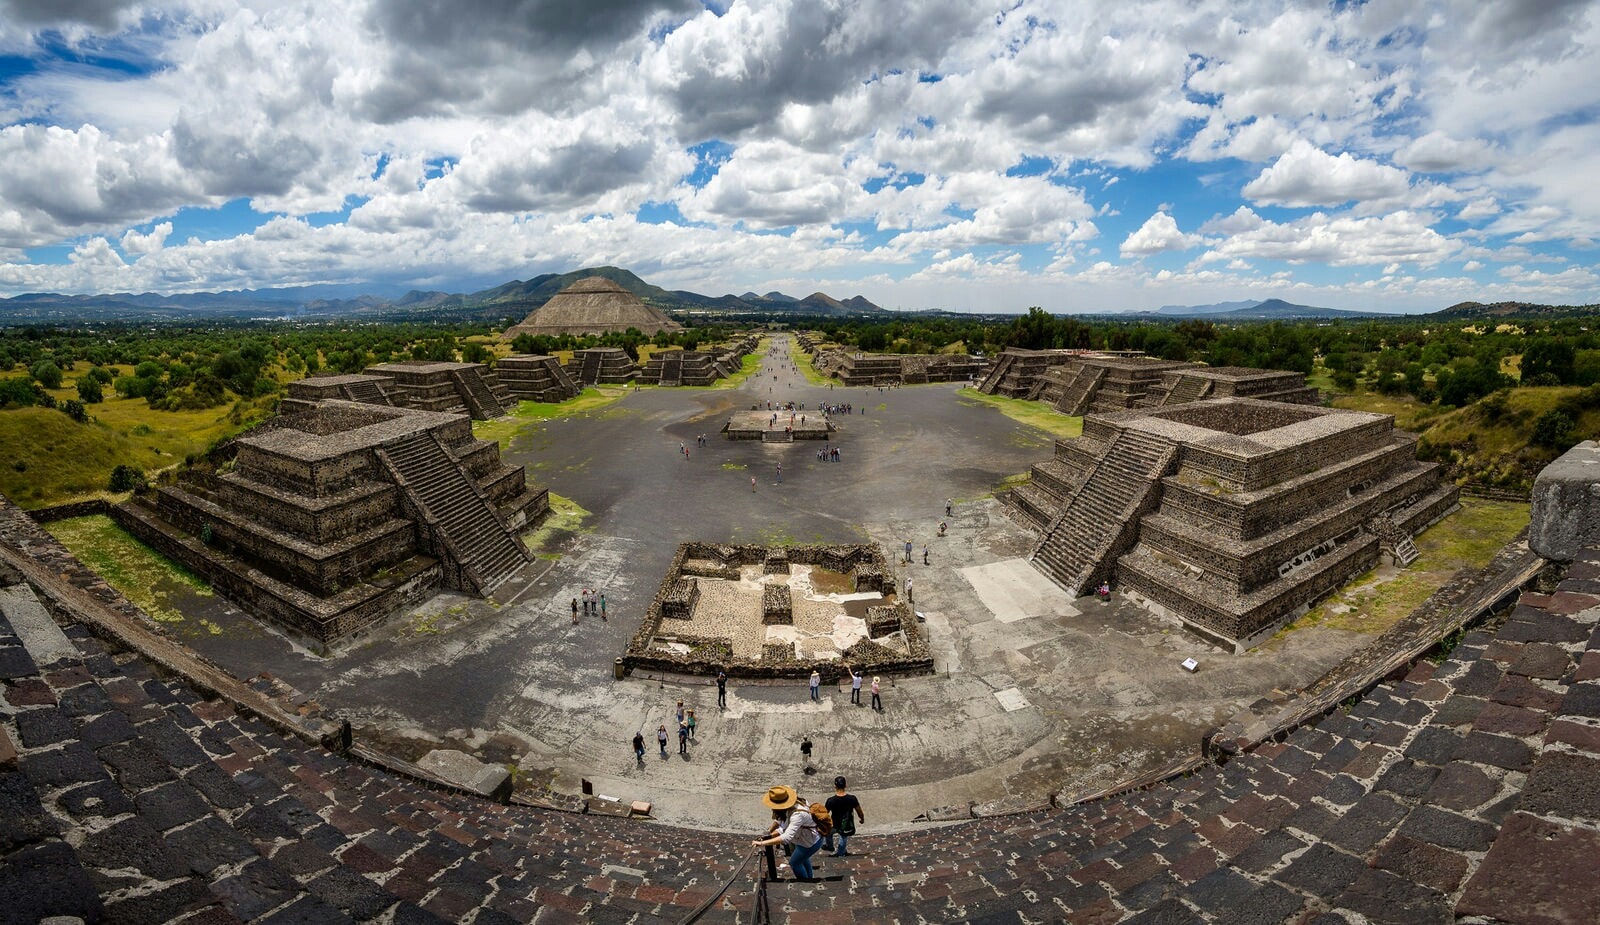 The Pyramids of Teotihuacan are an attraction you want to visit during your Mexico City Travel